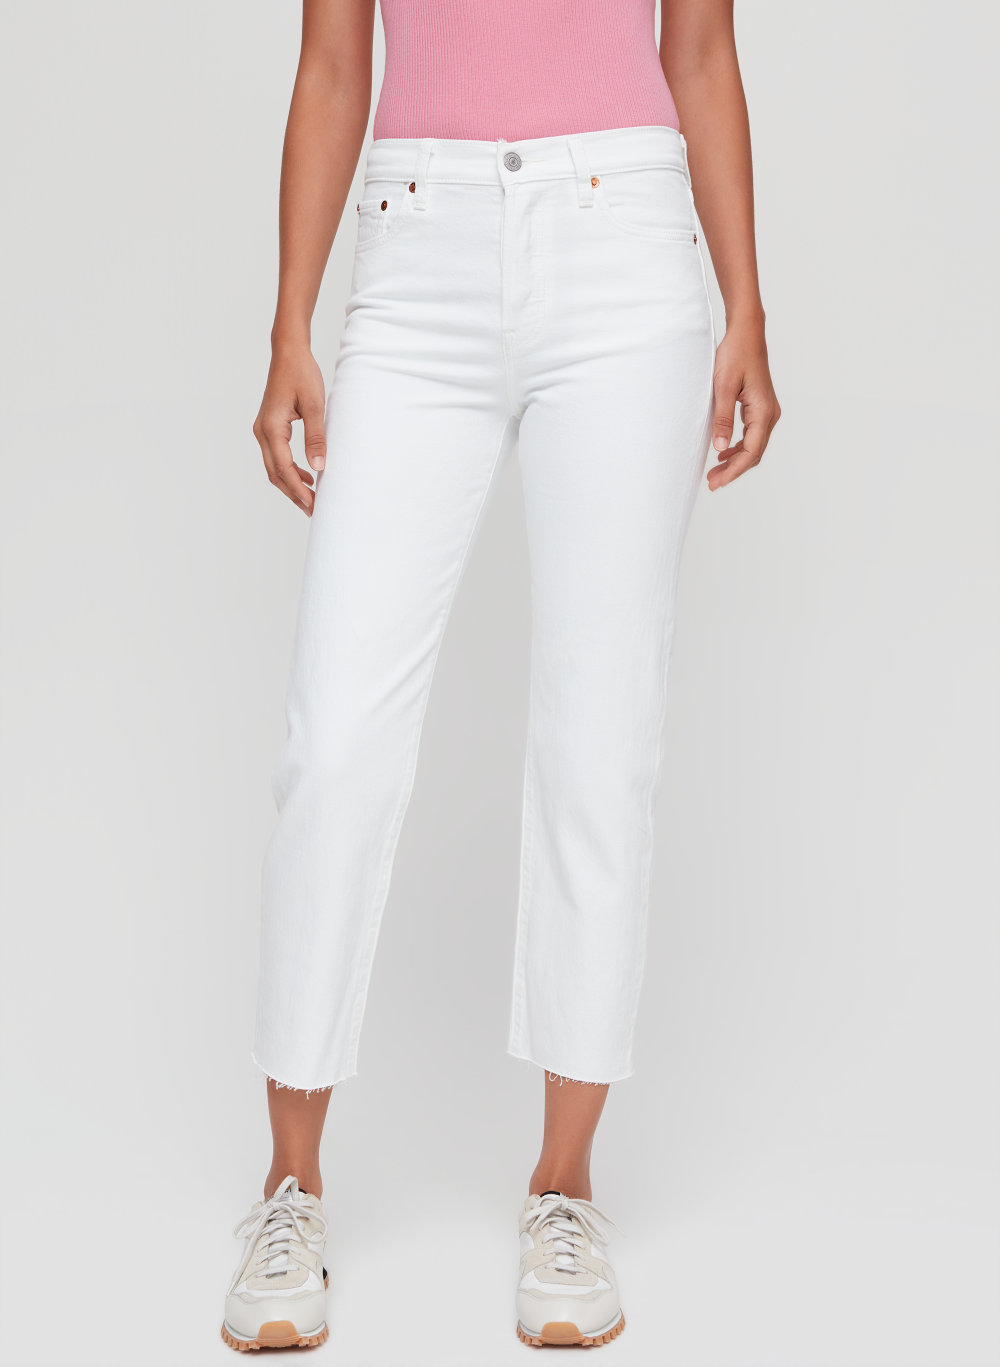 levis wedgie jeans white